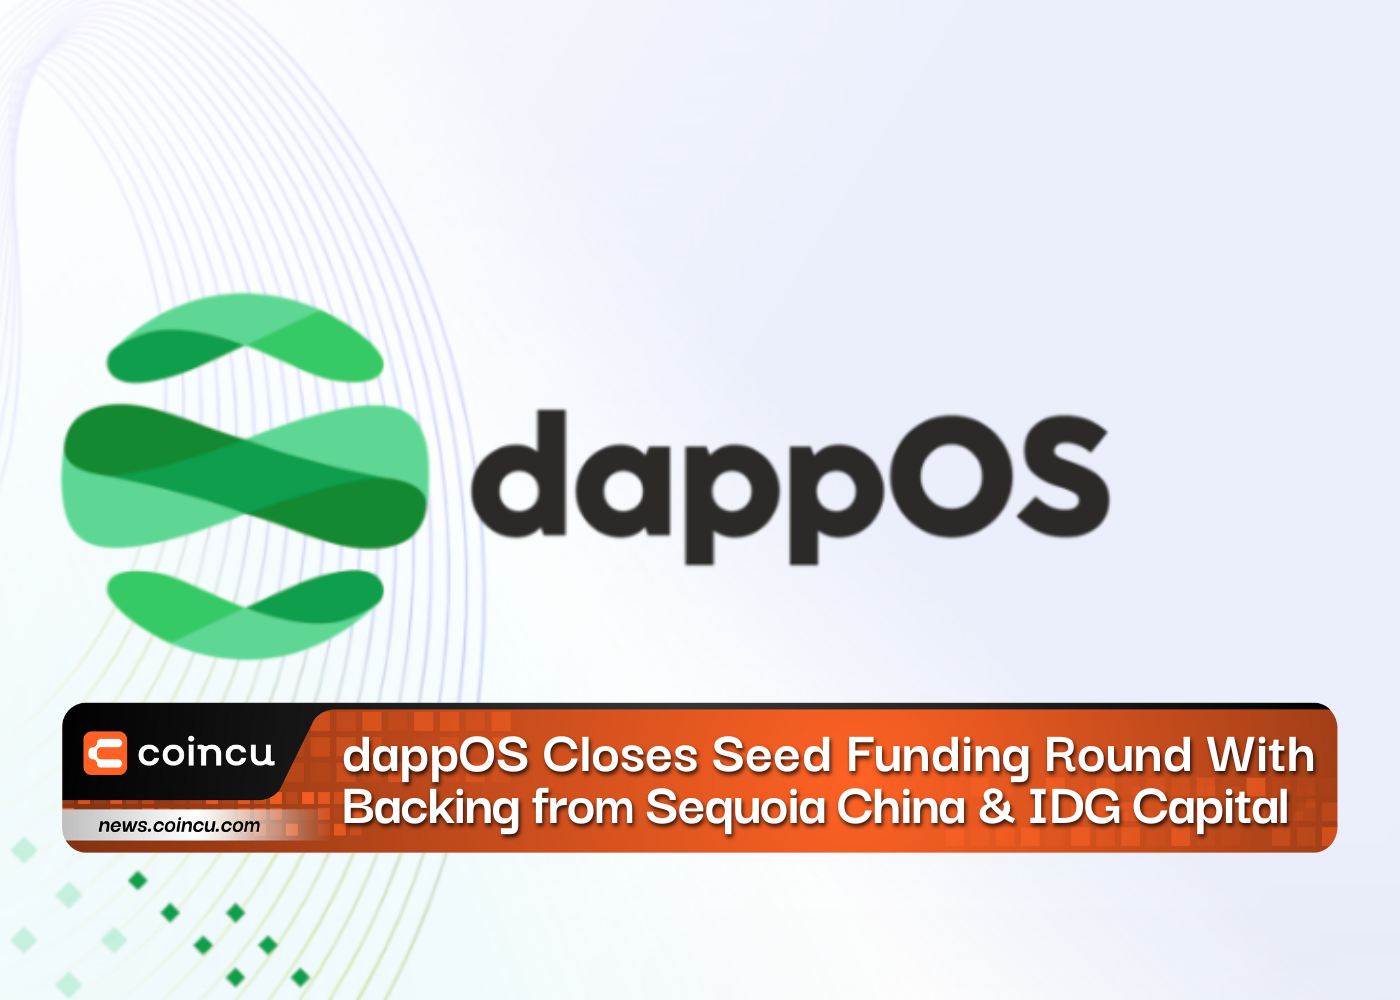 dappOS Closes Seed Funding Round With